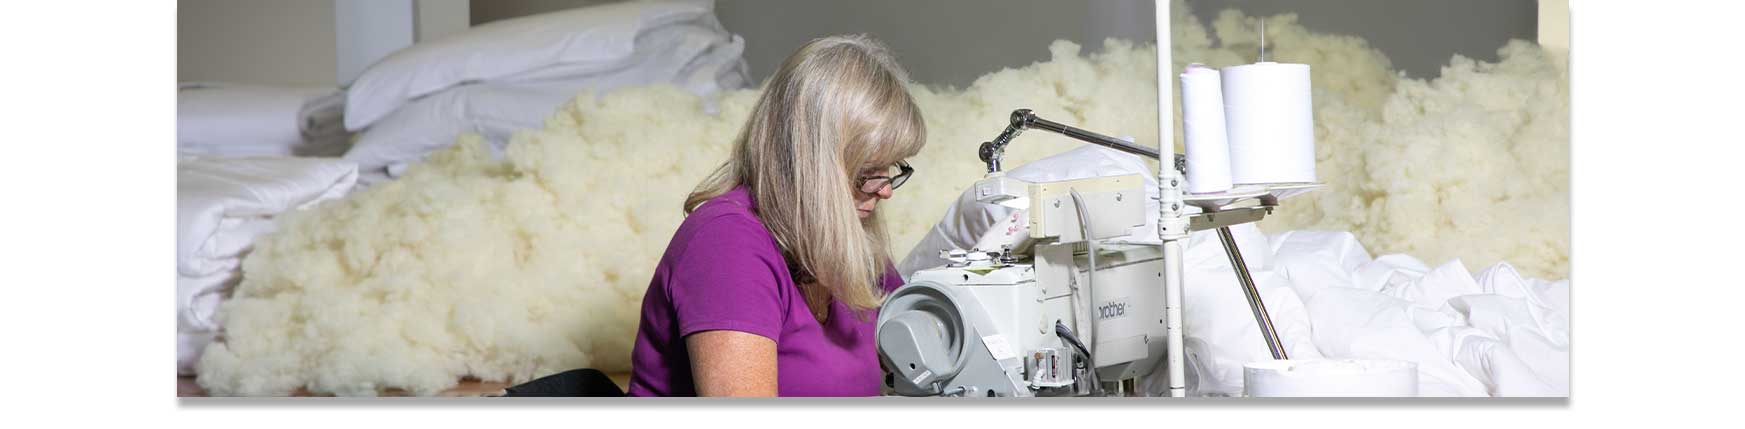 Devon Duvets seamstress expertly crafting bedding, highlighting attention to detail and quality.